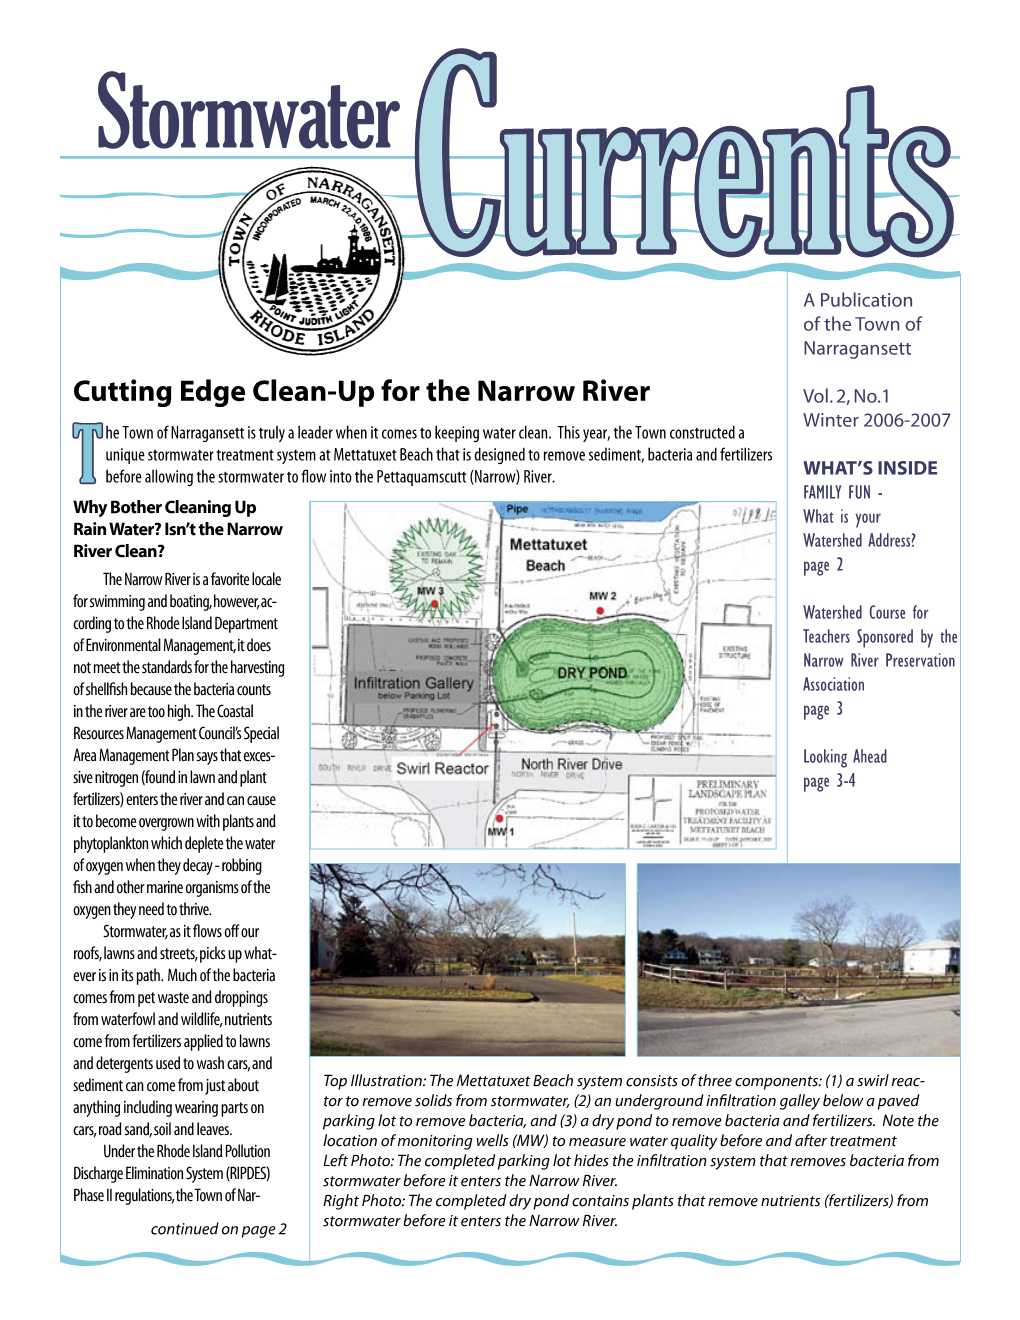 Stormwatercurrents a Publication of the Town of Narragansett